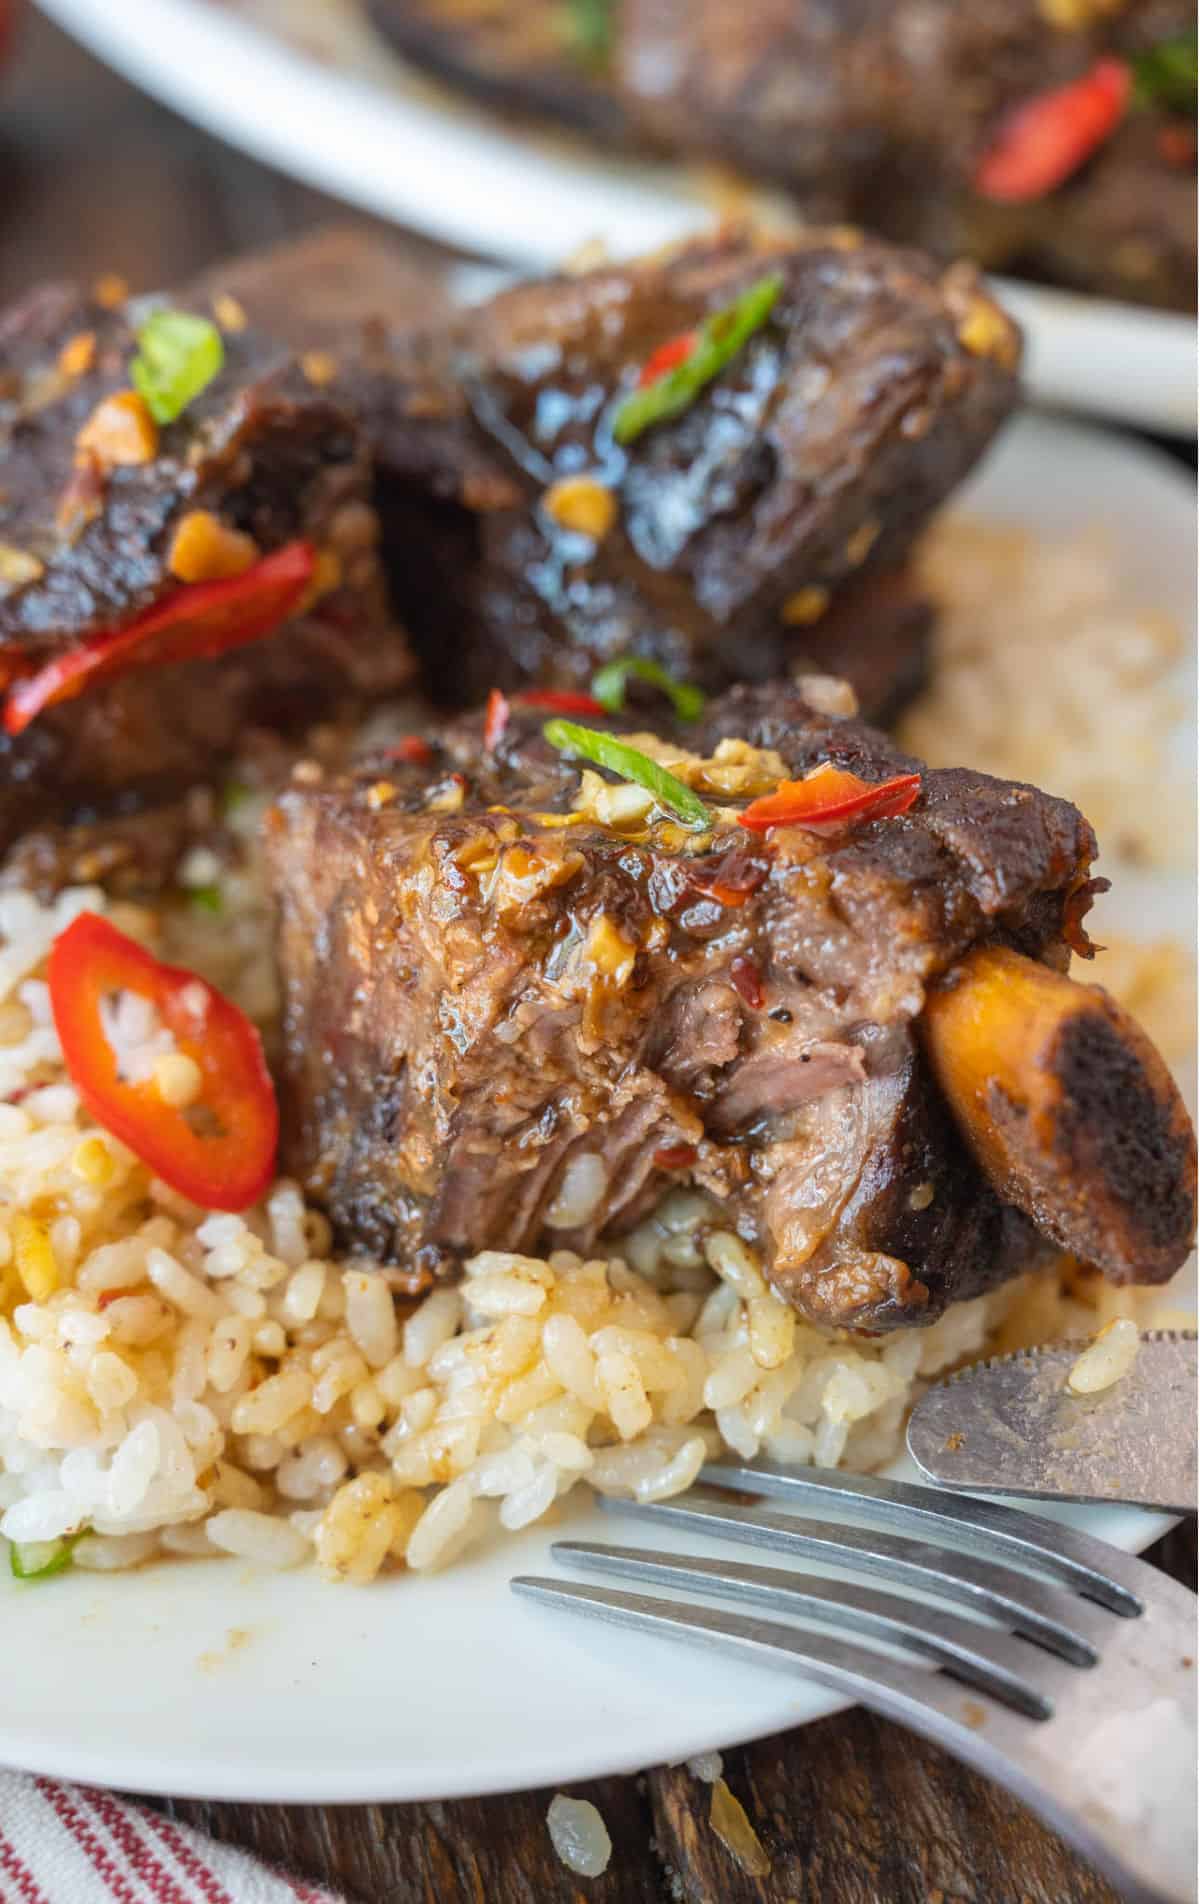 Short rib on a bed of rice.